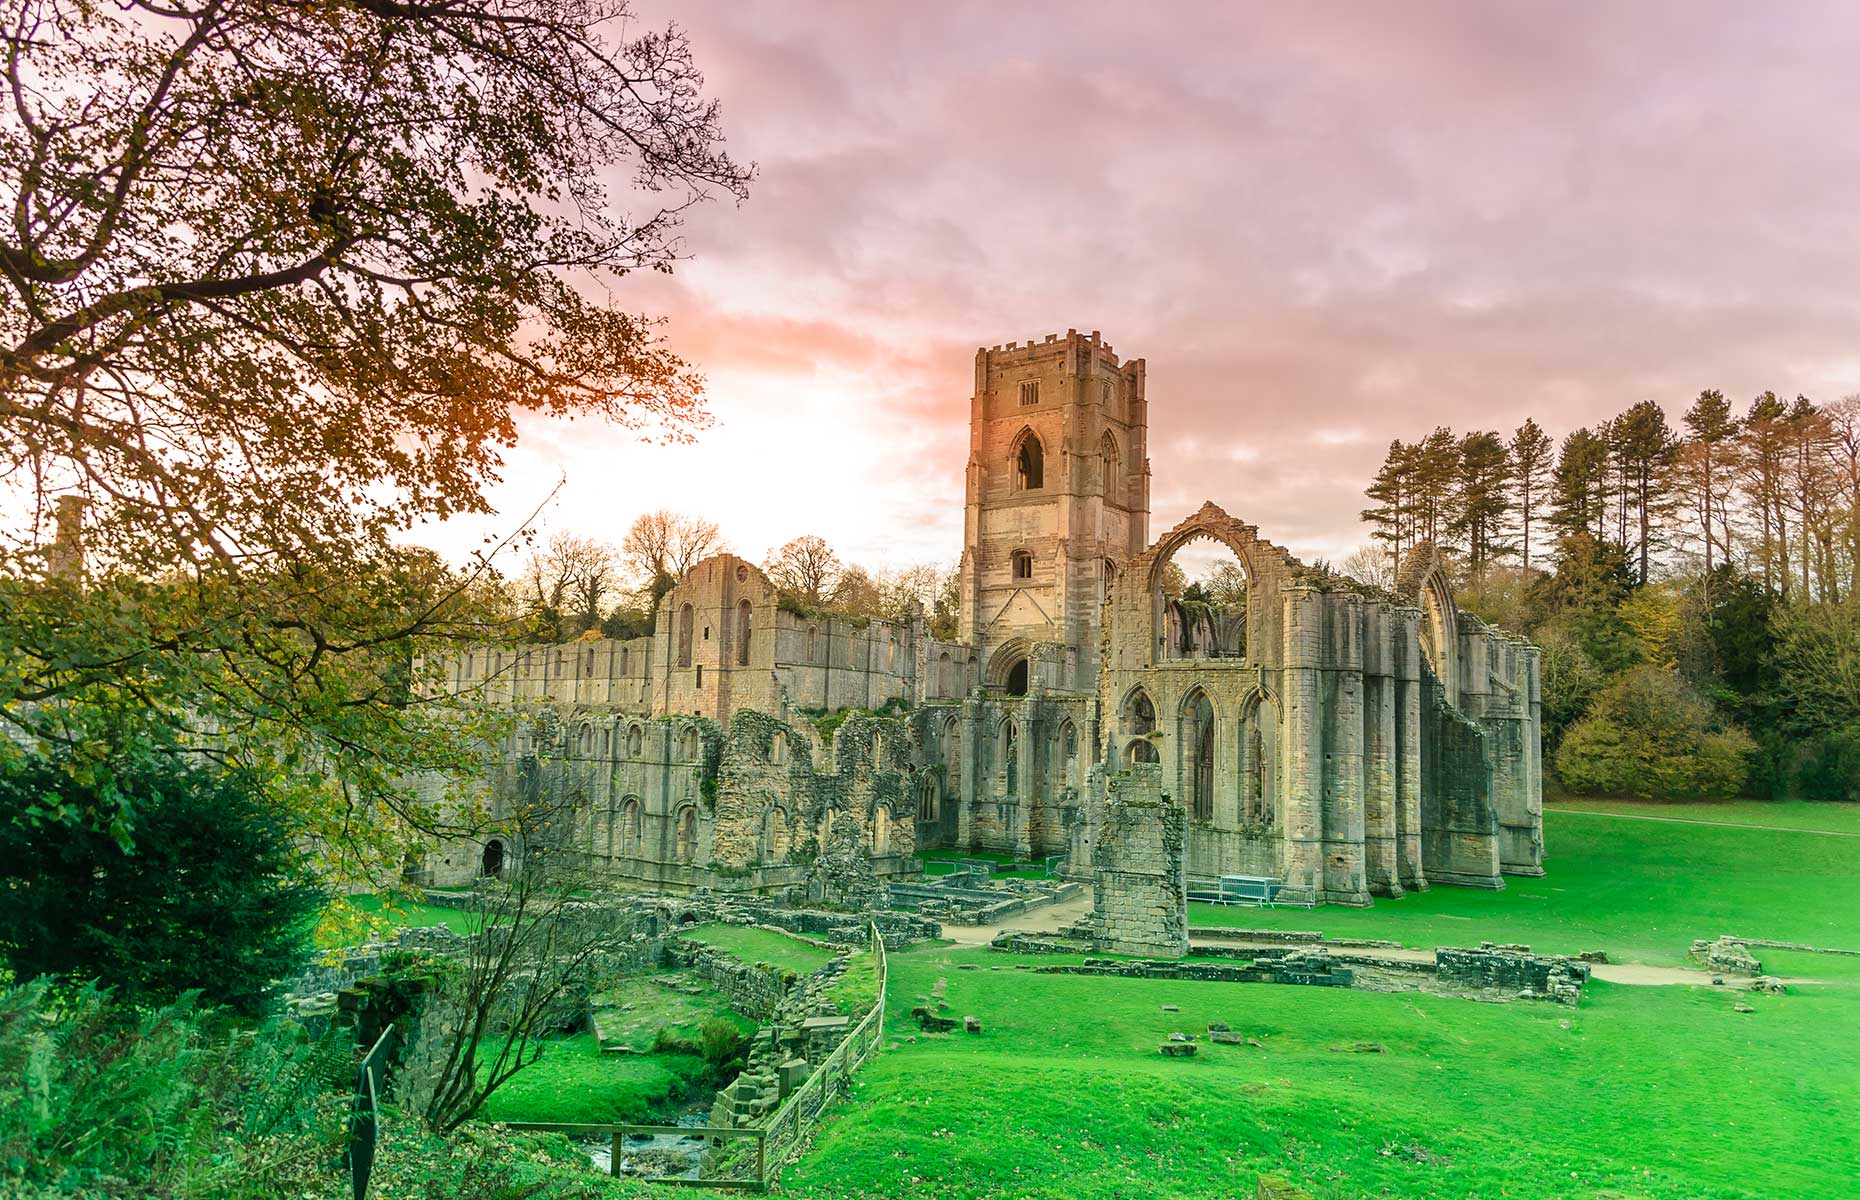 The ruins of Fountains Abbey, North Yorkshire (Image:  By Nicolo' Zangirolami/Shutterstock)